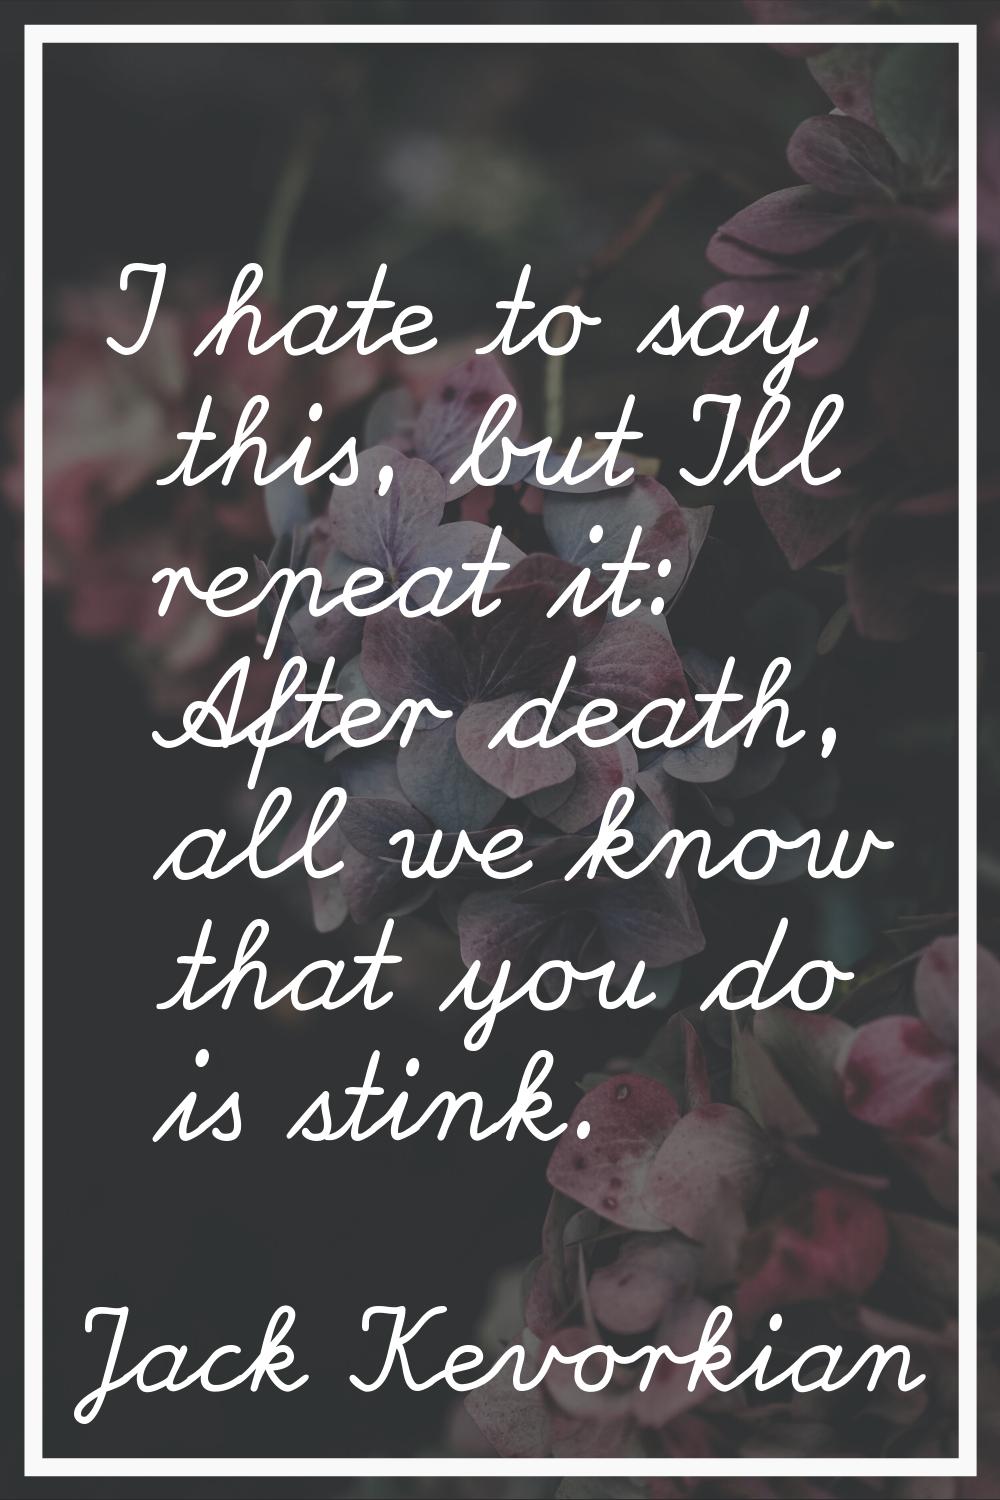 I hate to say this, but I'll repeat it: After death, all we know that you do is stink.